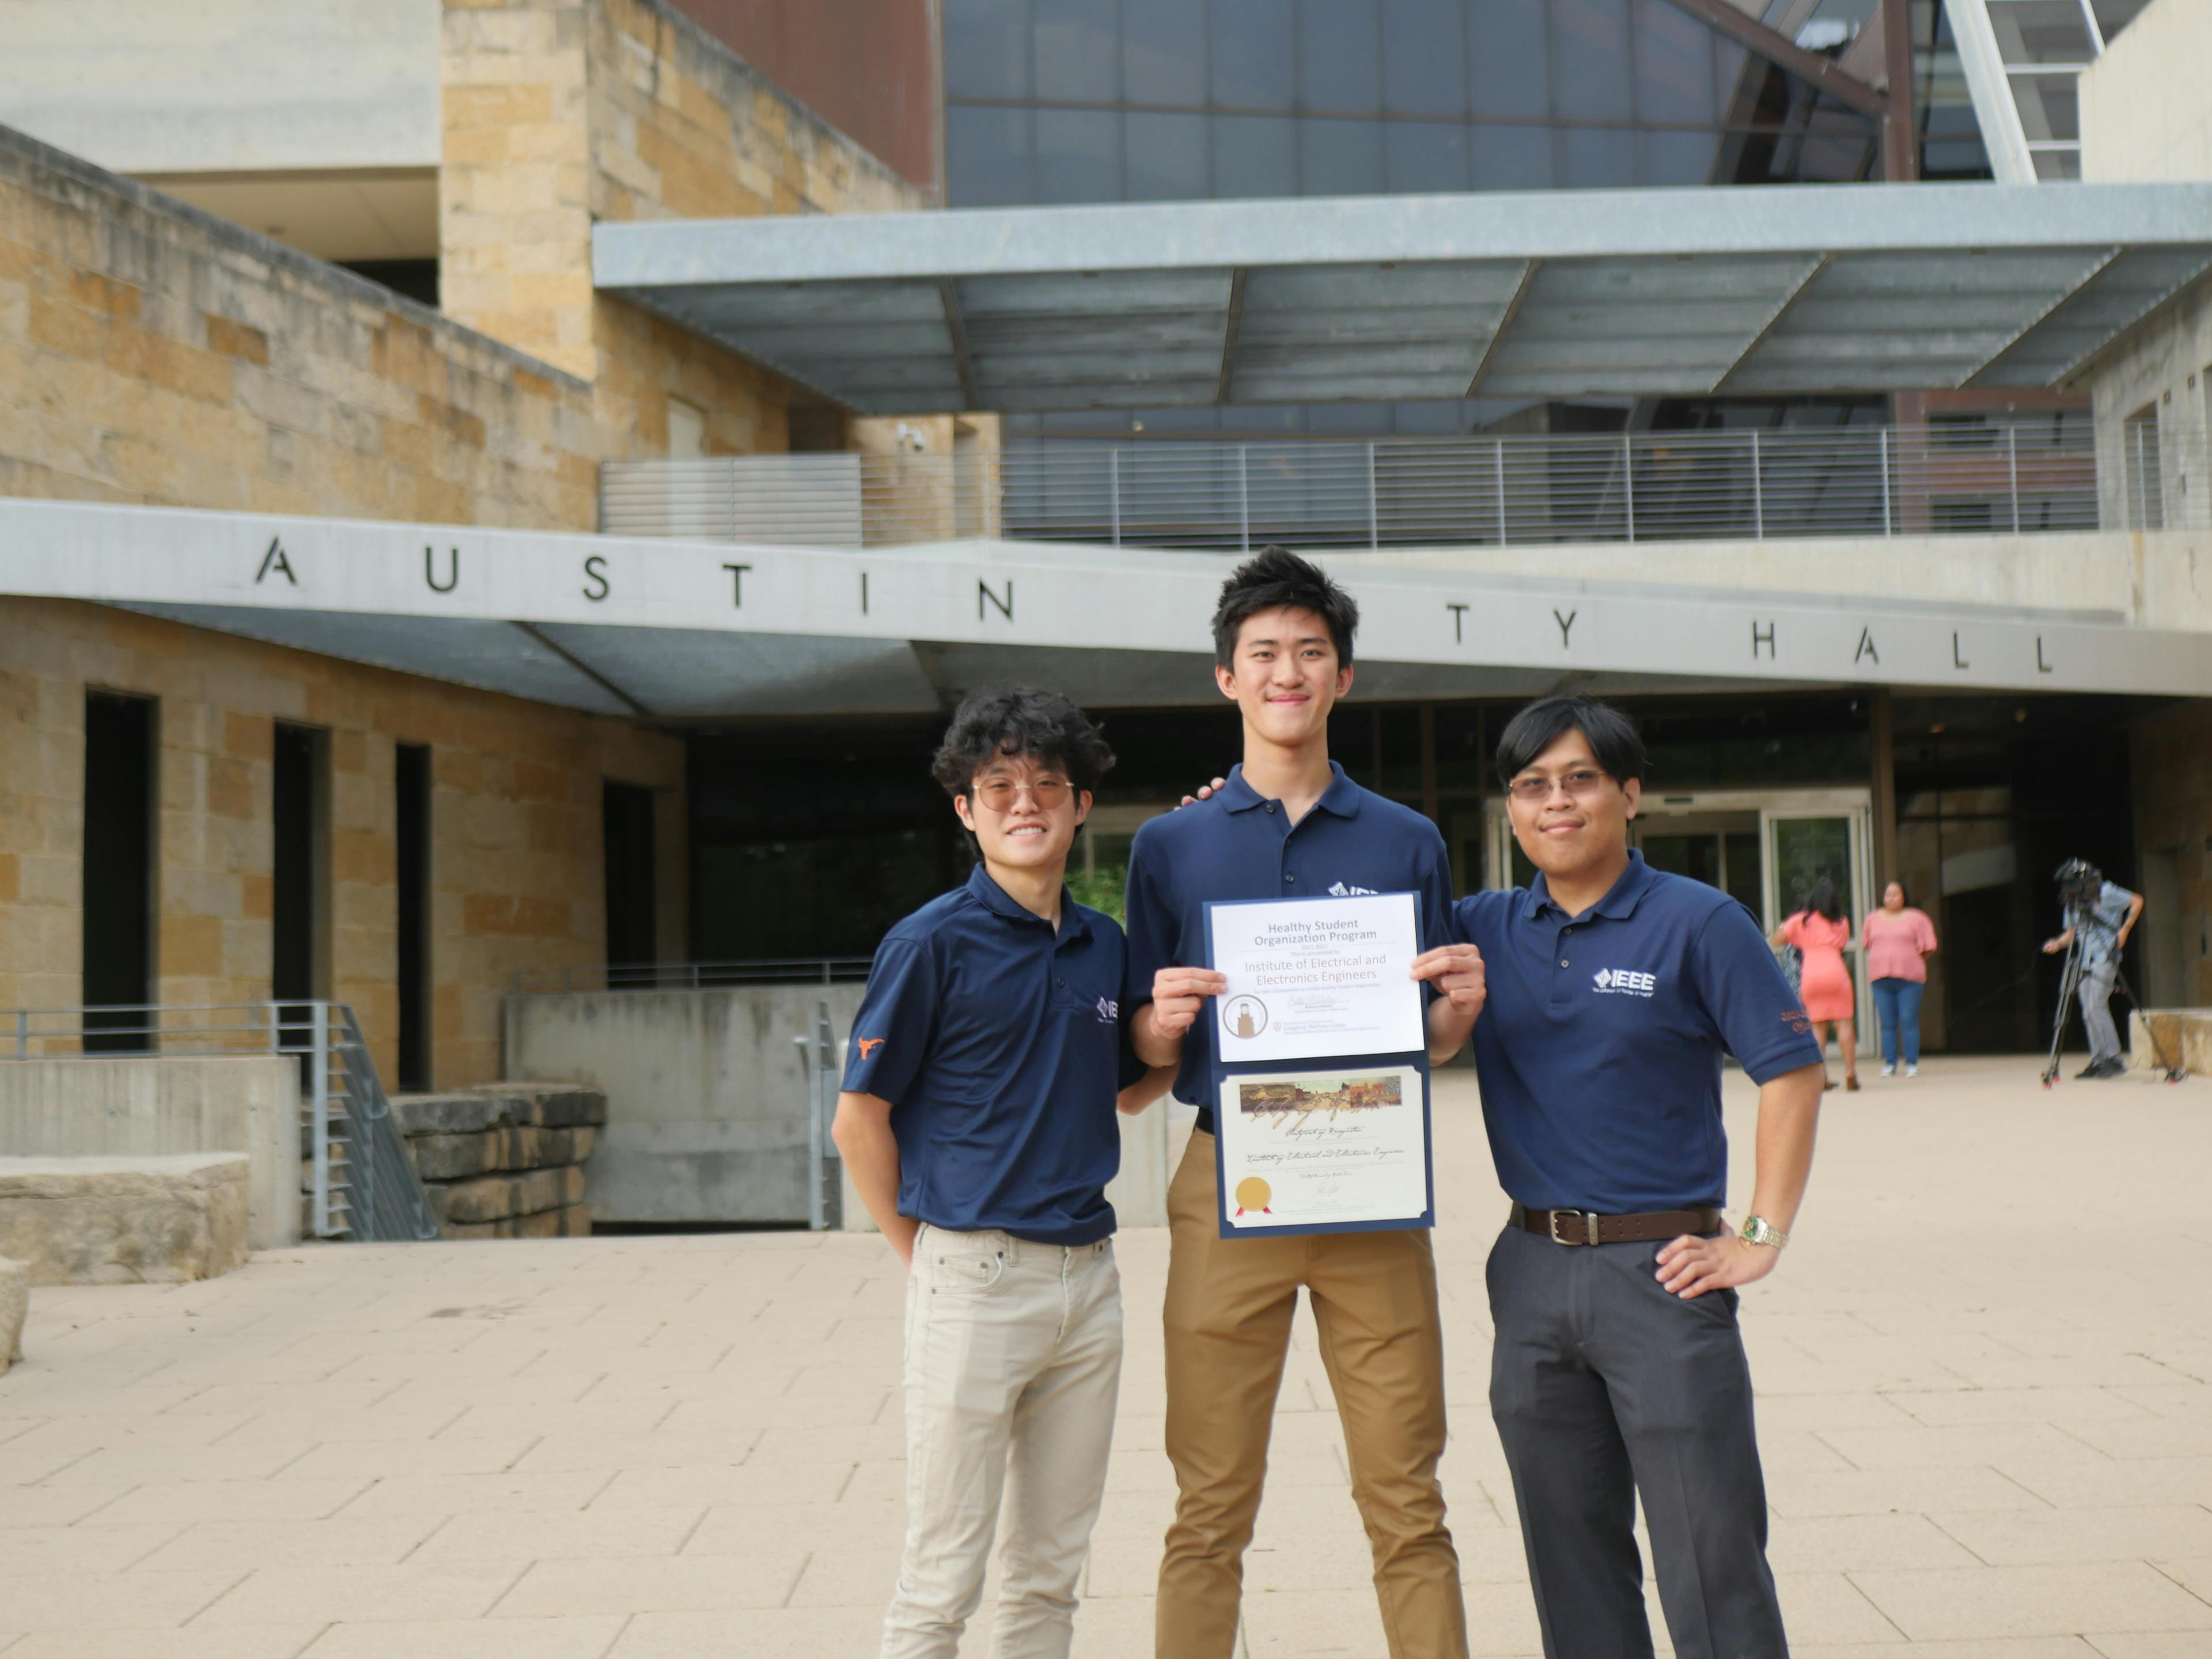 3 IEEE members present an award in front of Austin City Hall